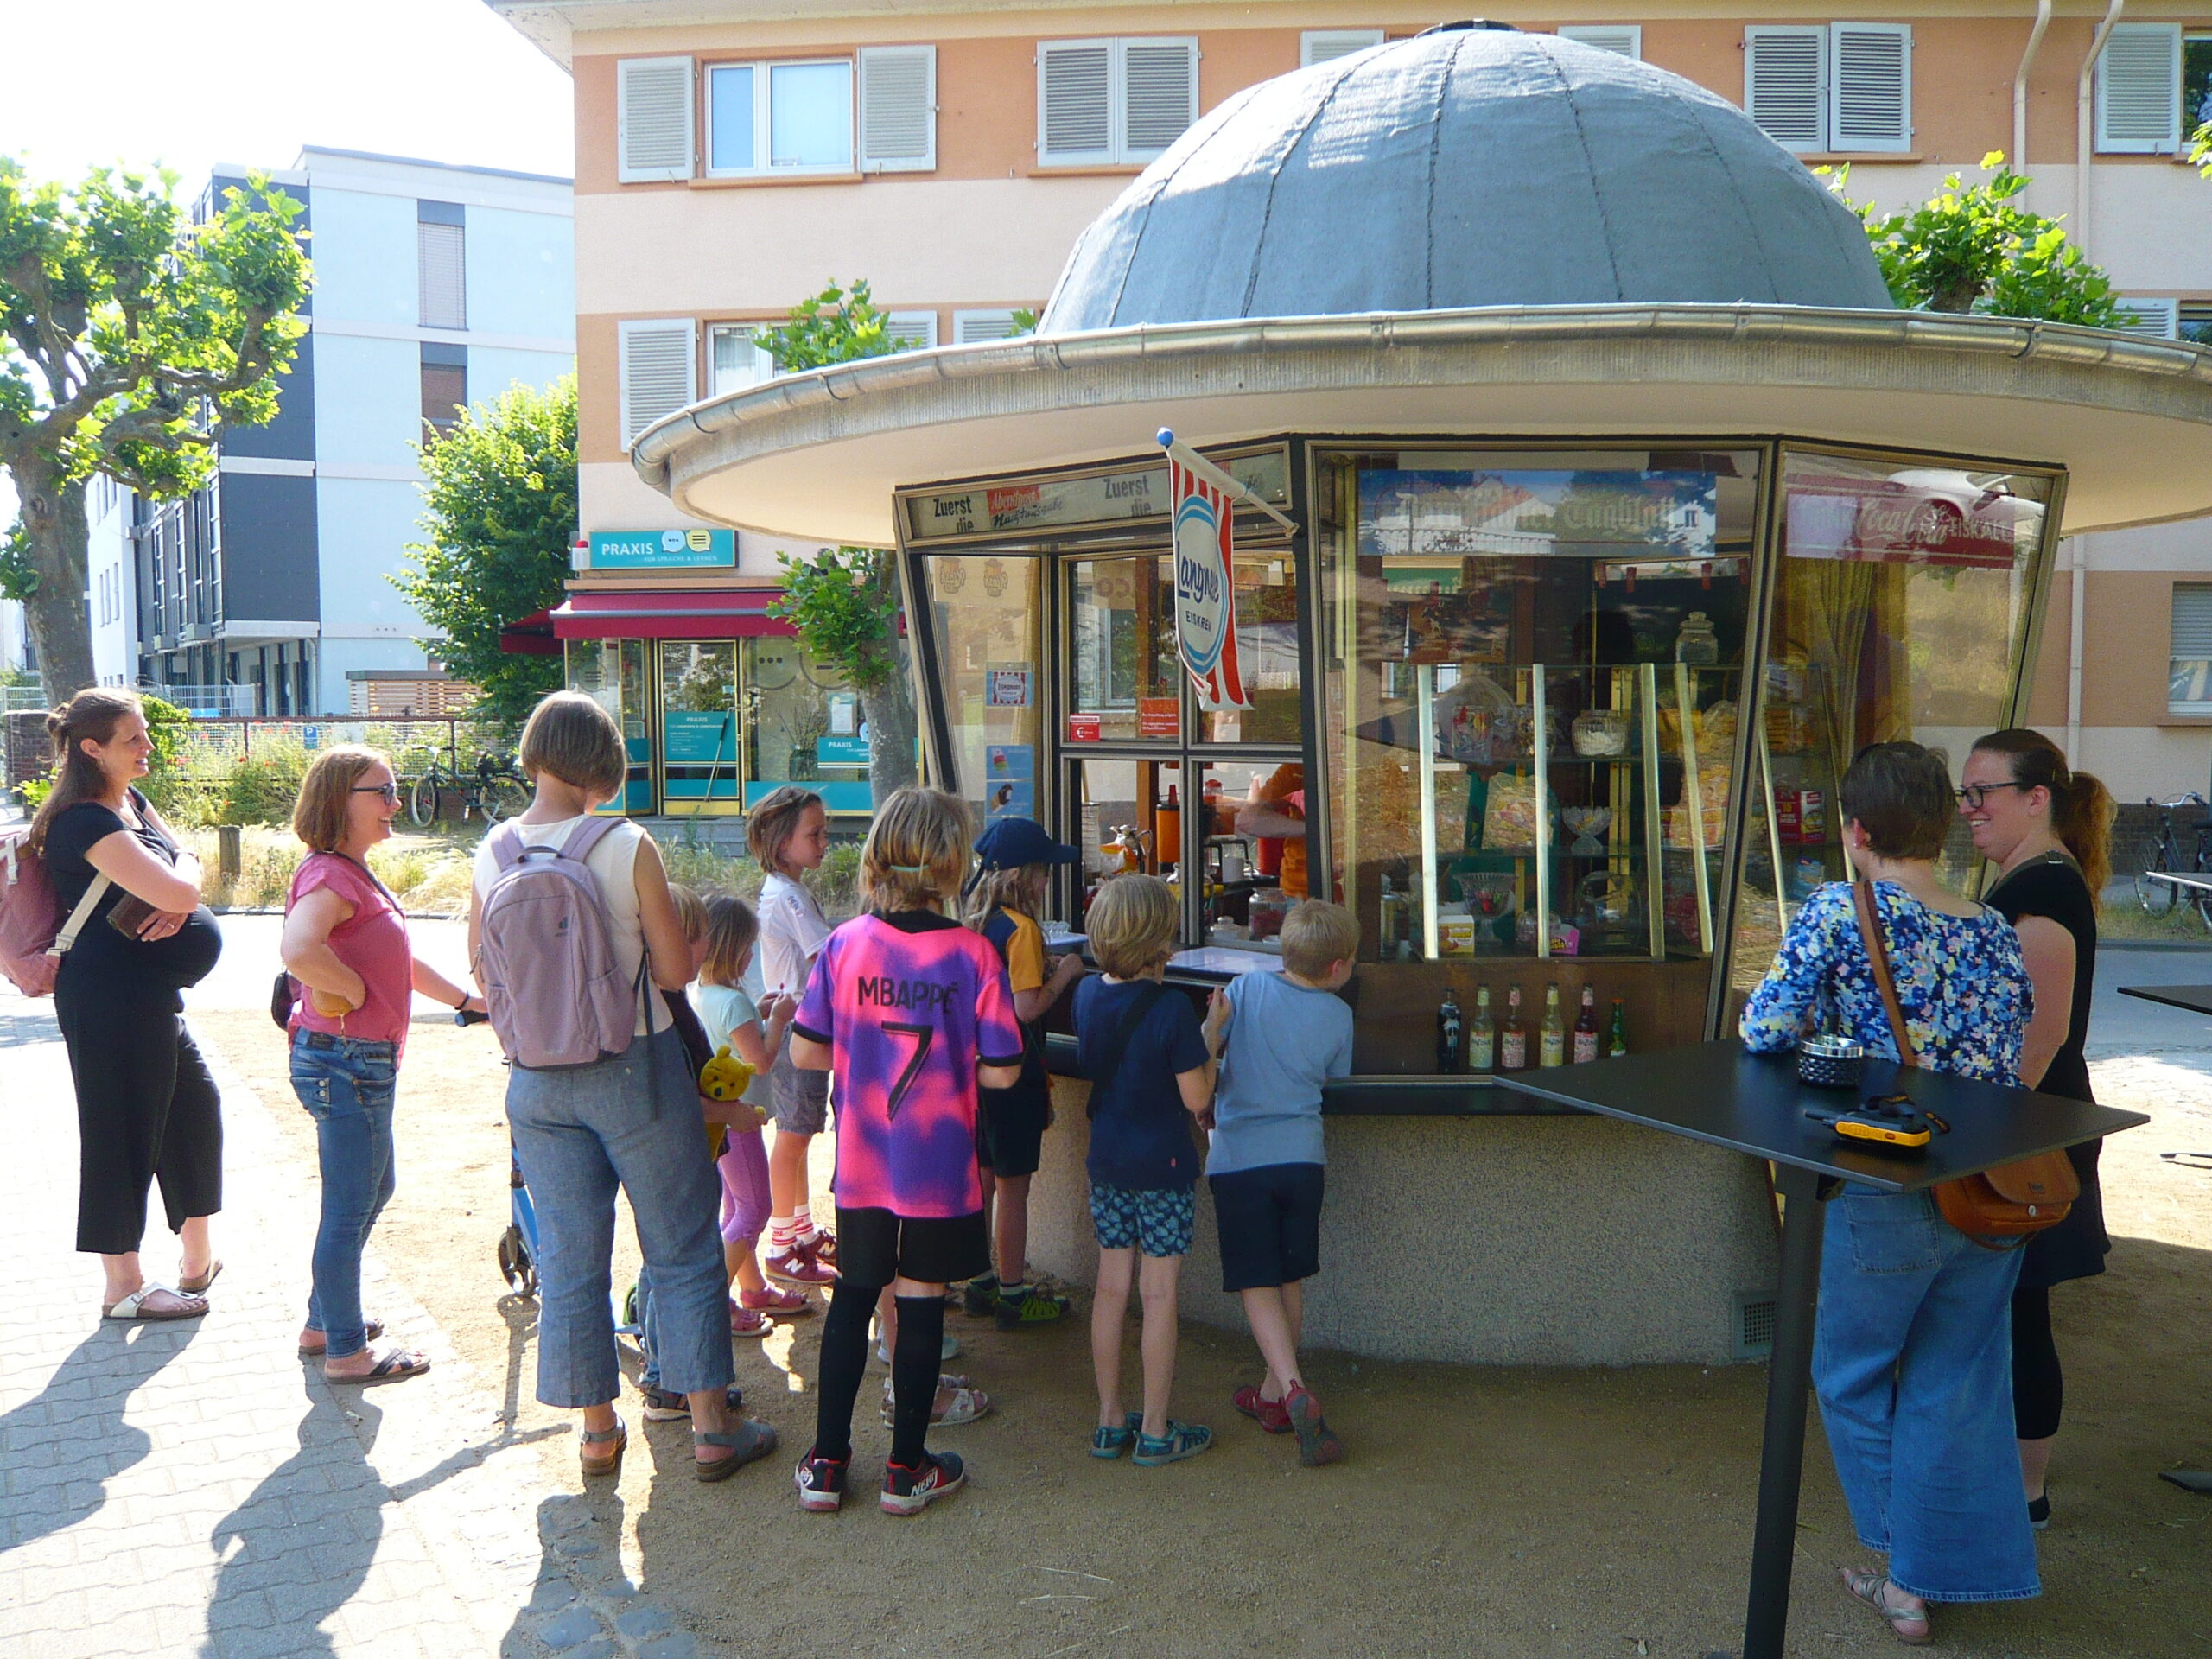 You are currently viewing Kiosk 1975: Erster Monat im Betrieb – es ist uns ein Fest!